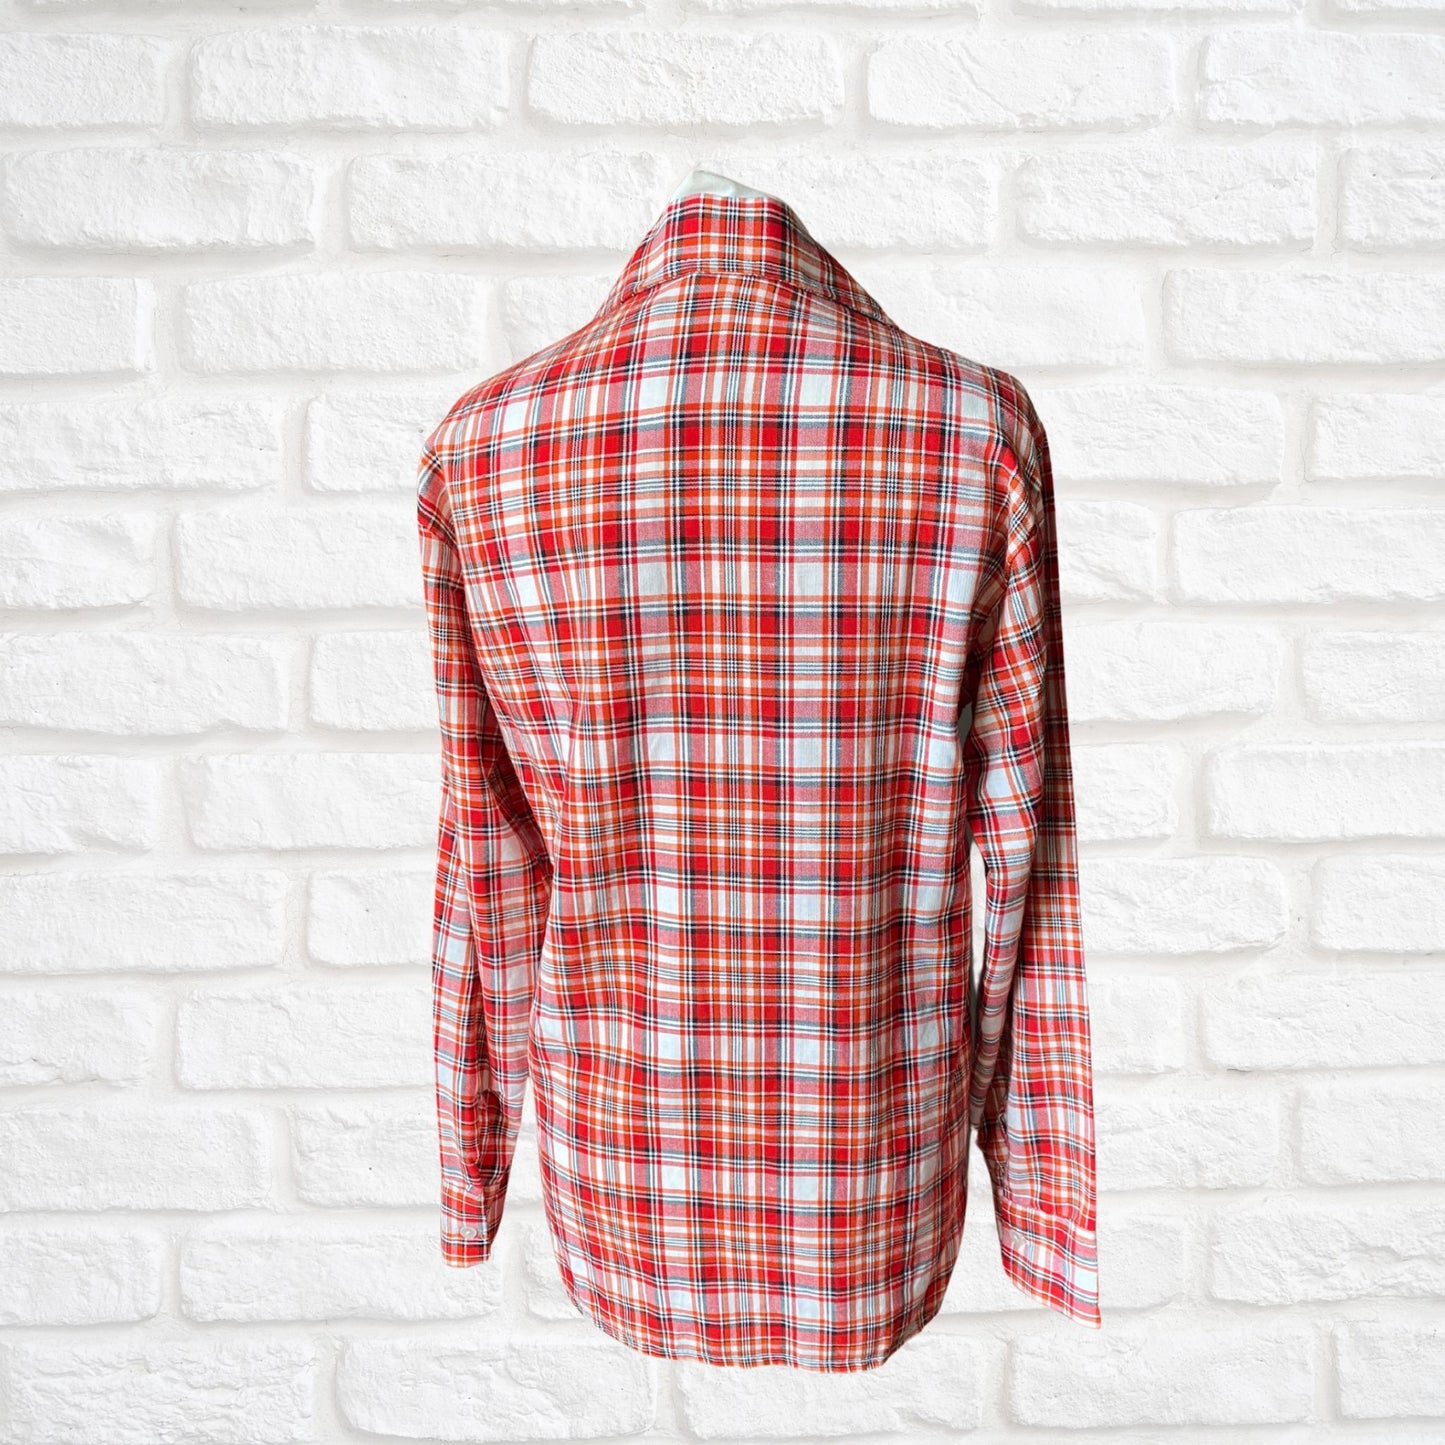 70s Vintage Checked Lightweight Shirt with Wide Collar - Classic Retro Style. Approx UK size XS -S (men) 8-12 (women)